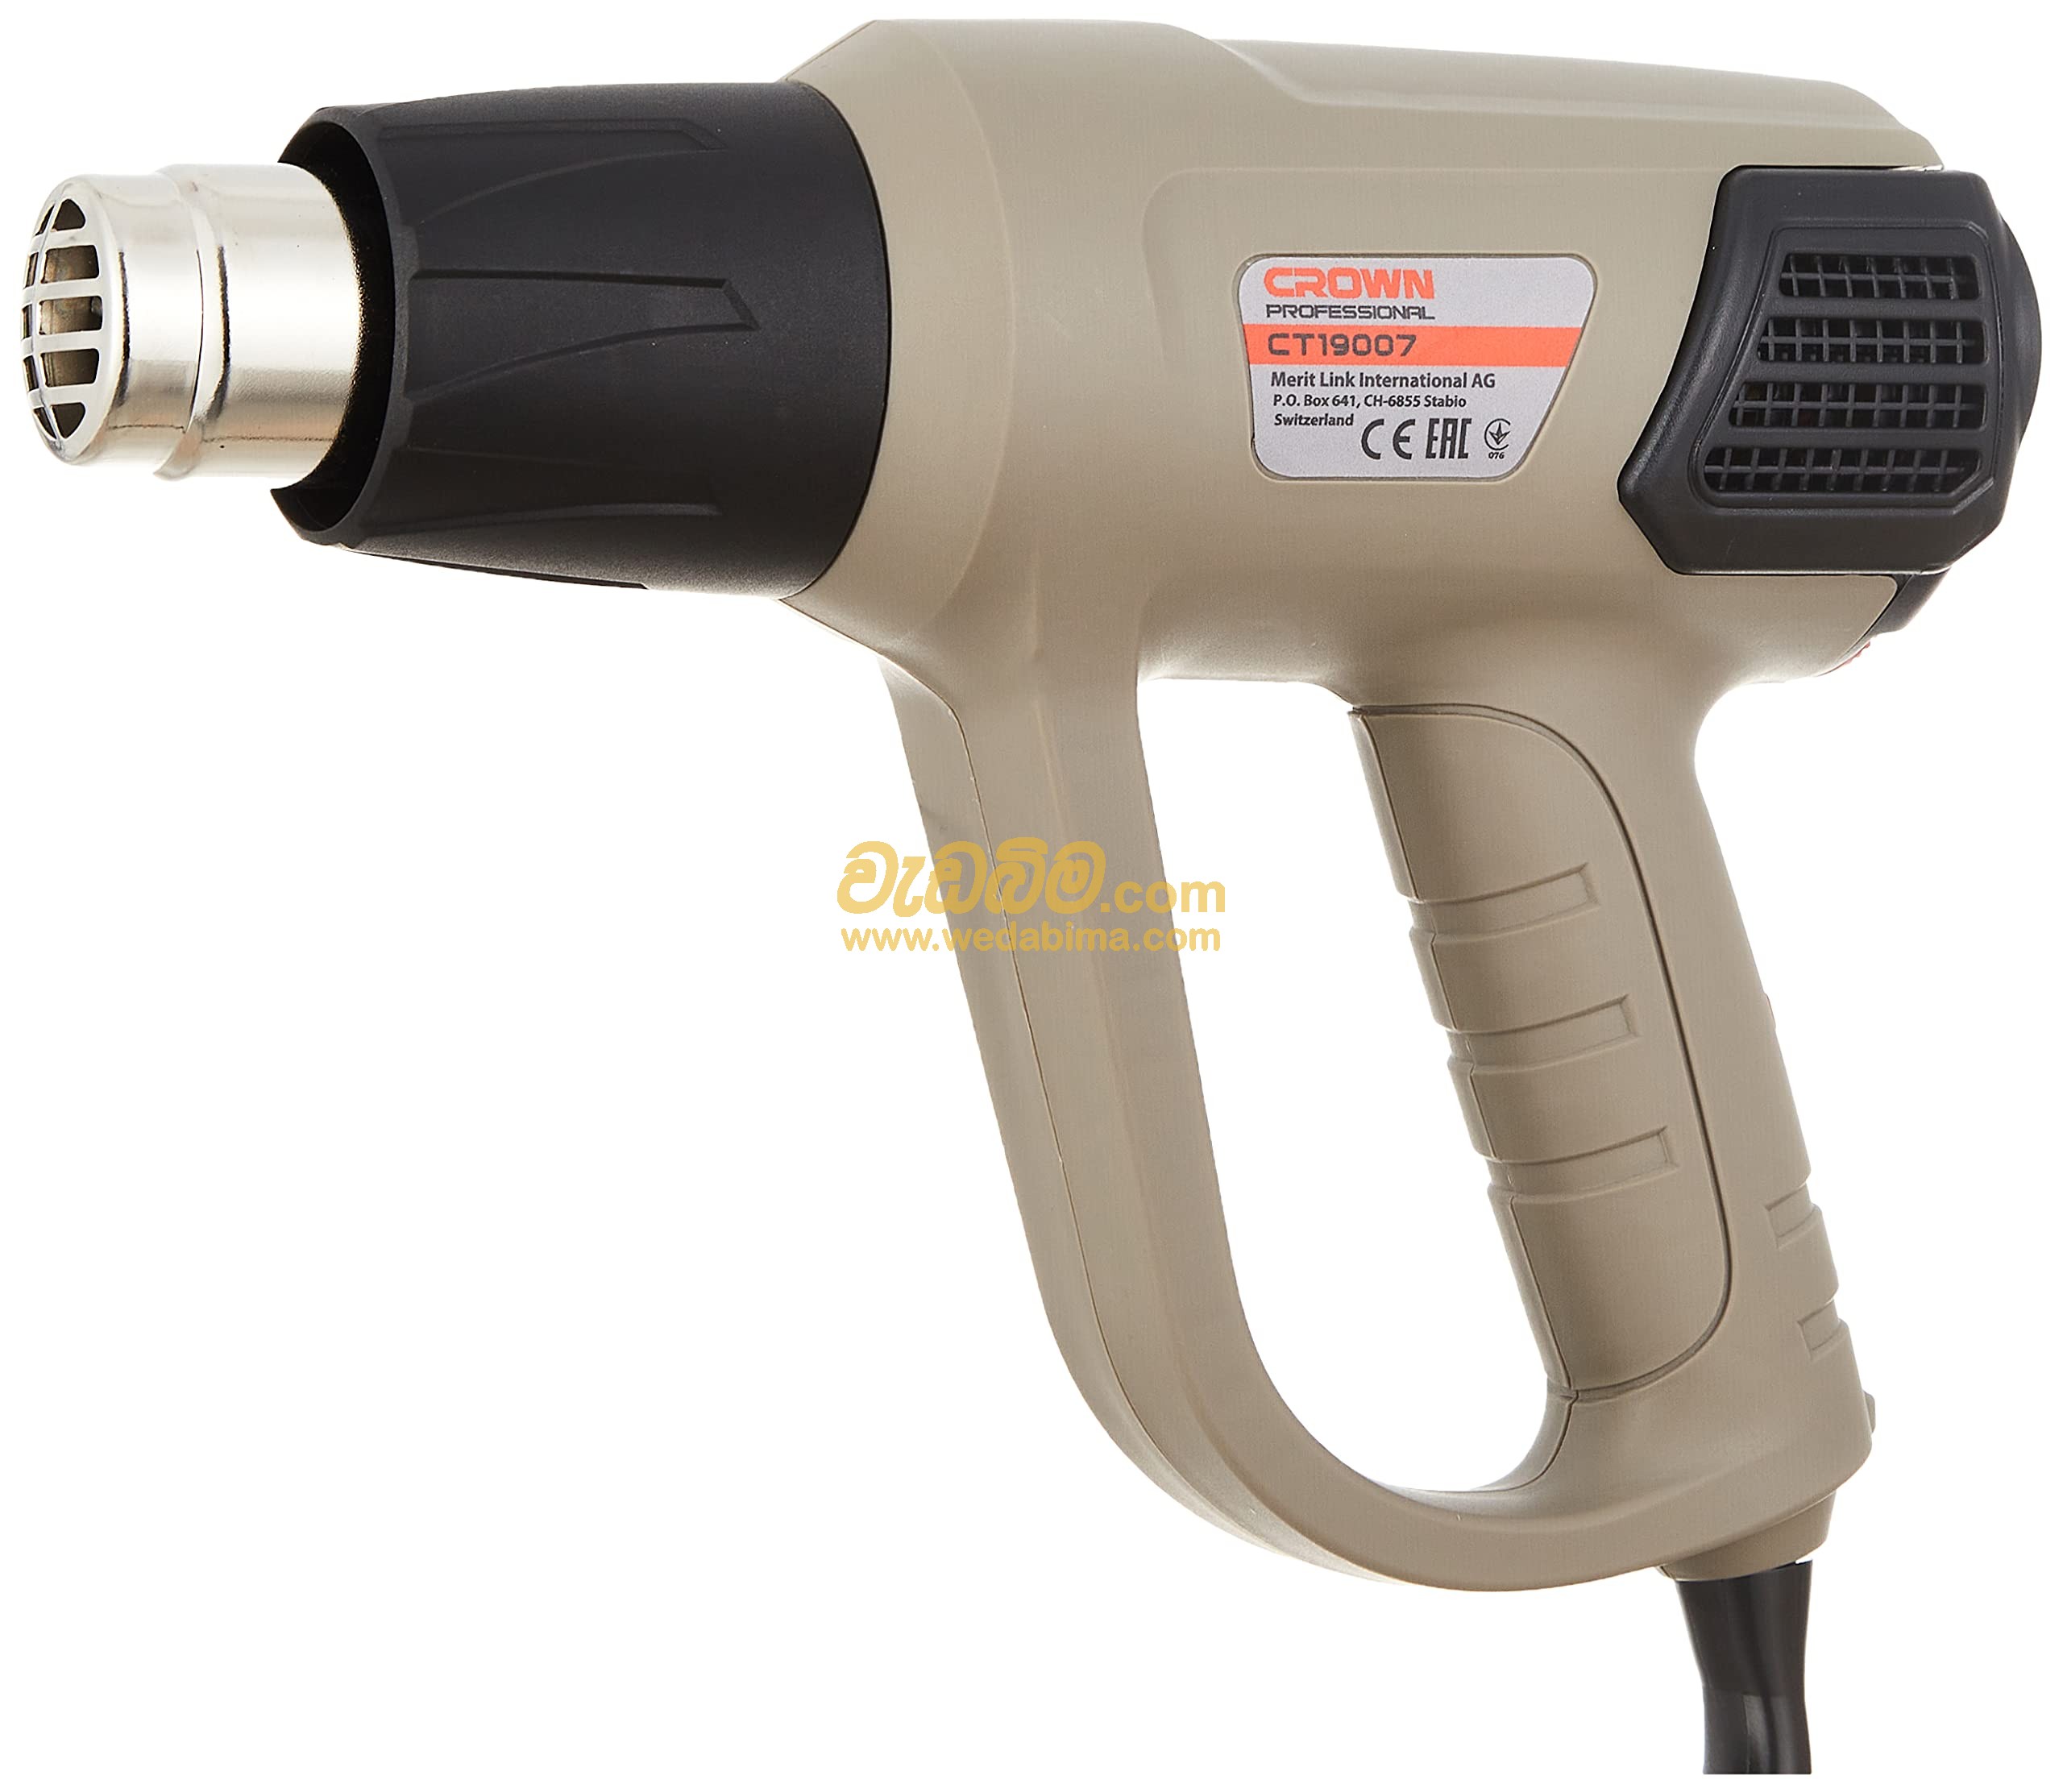 Cover image for 2000W Heat Gun